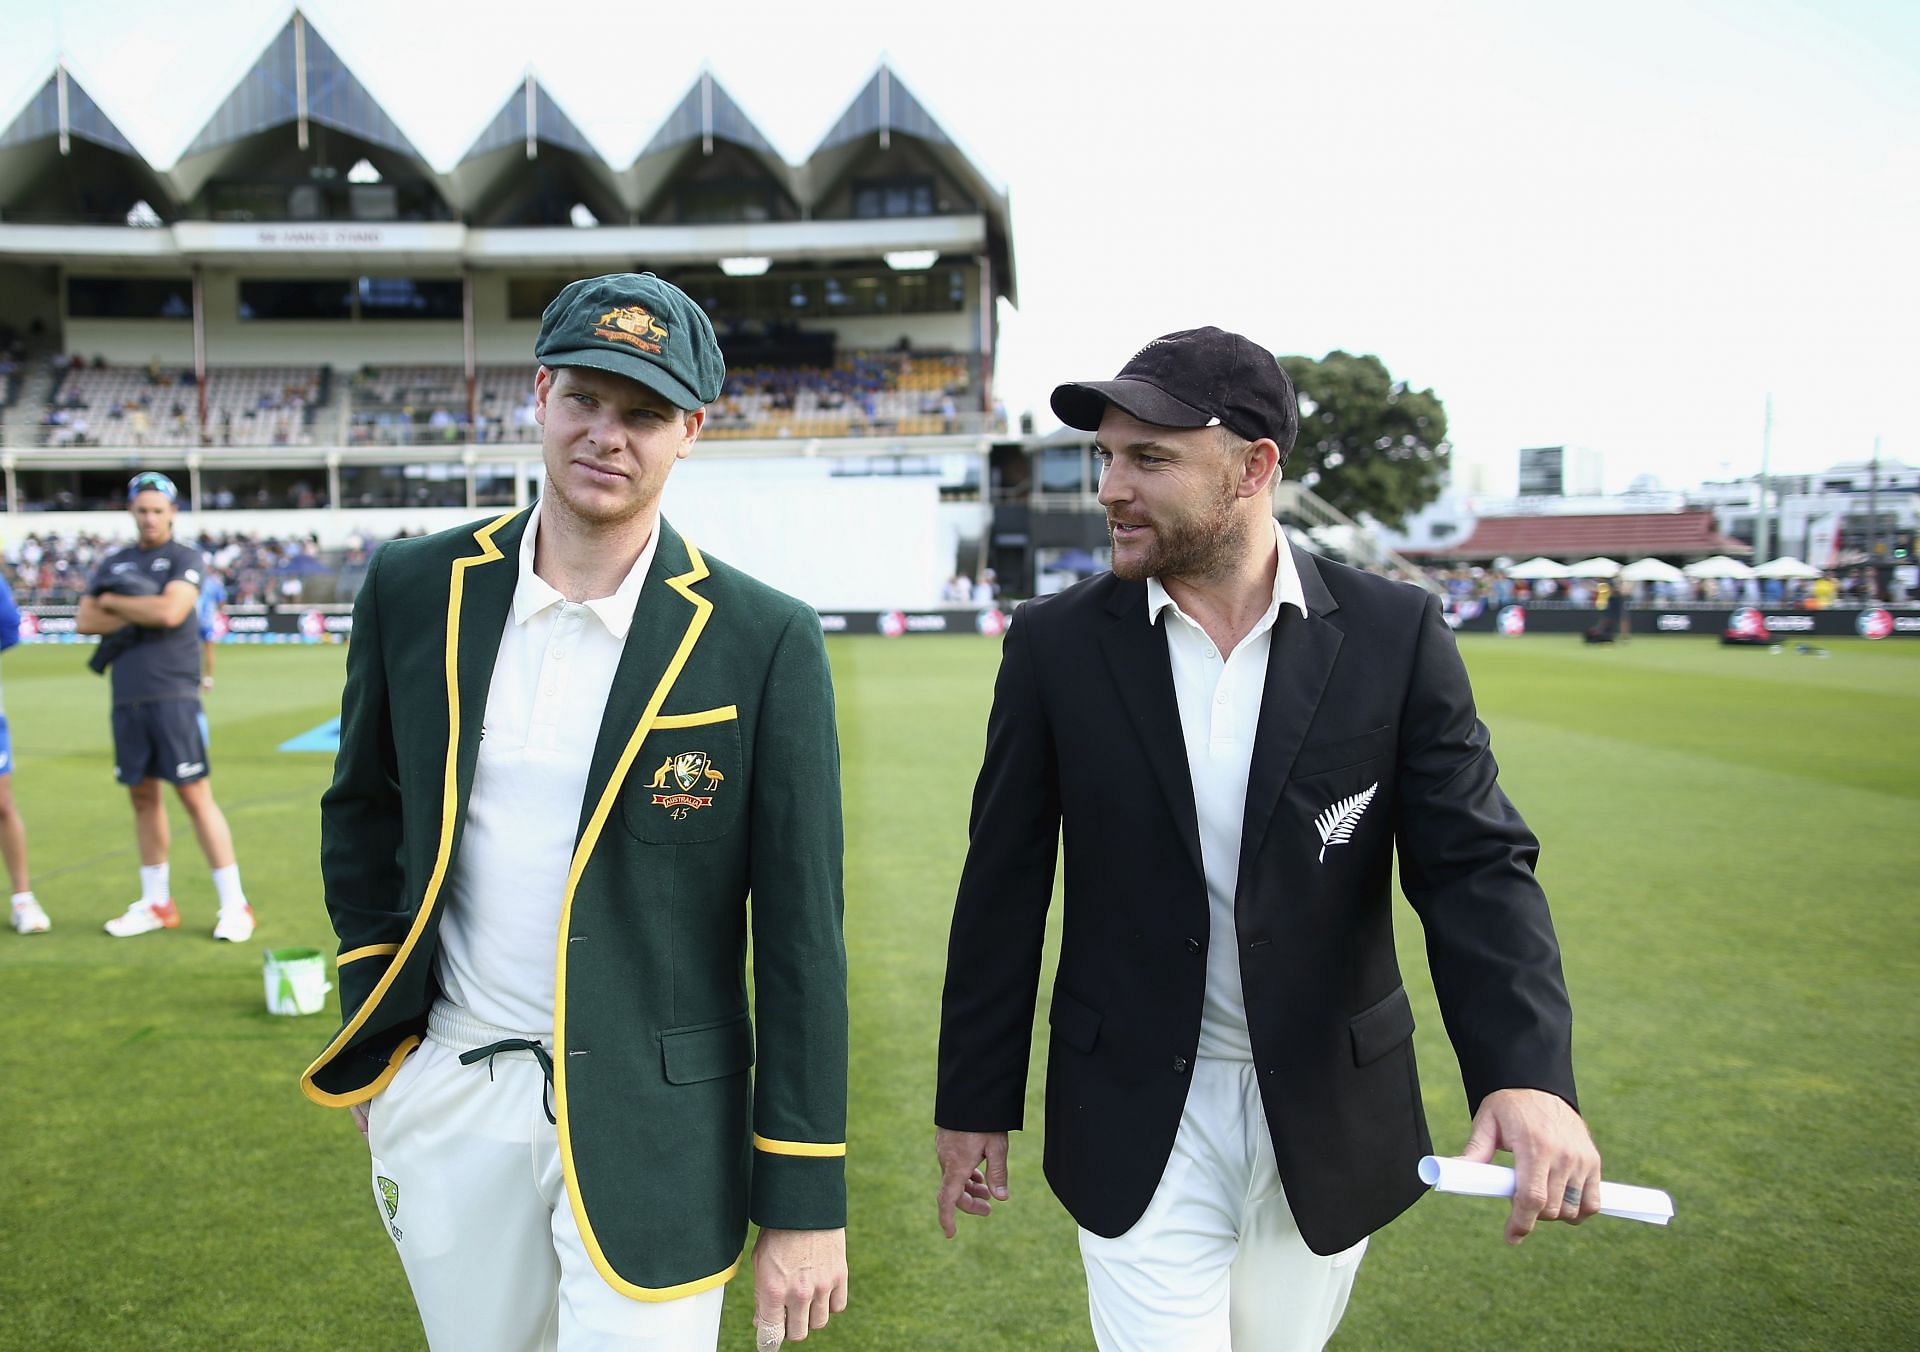 Steve Smith (L) doubts if Bazball will be the same when England play against Australia (Image courtesy: Getty)